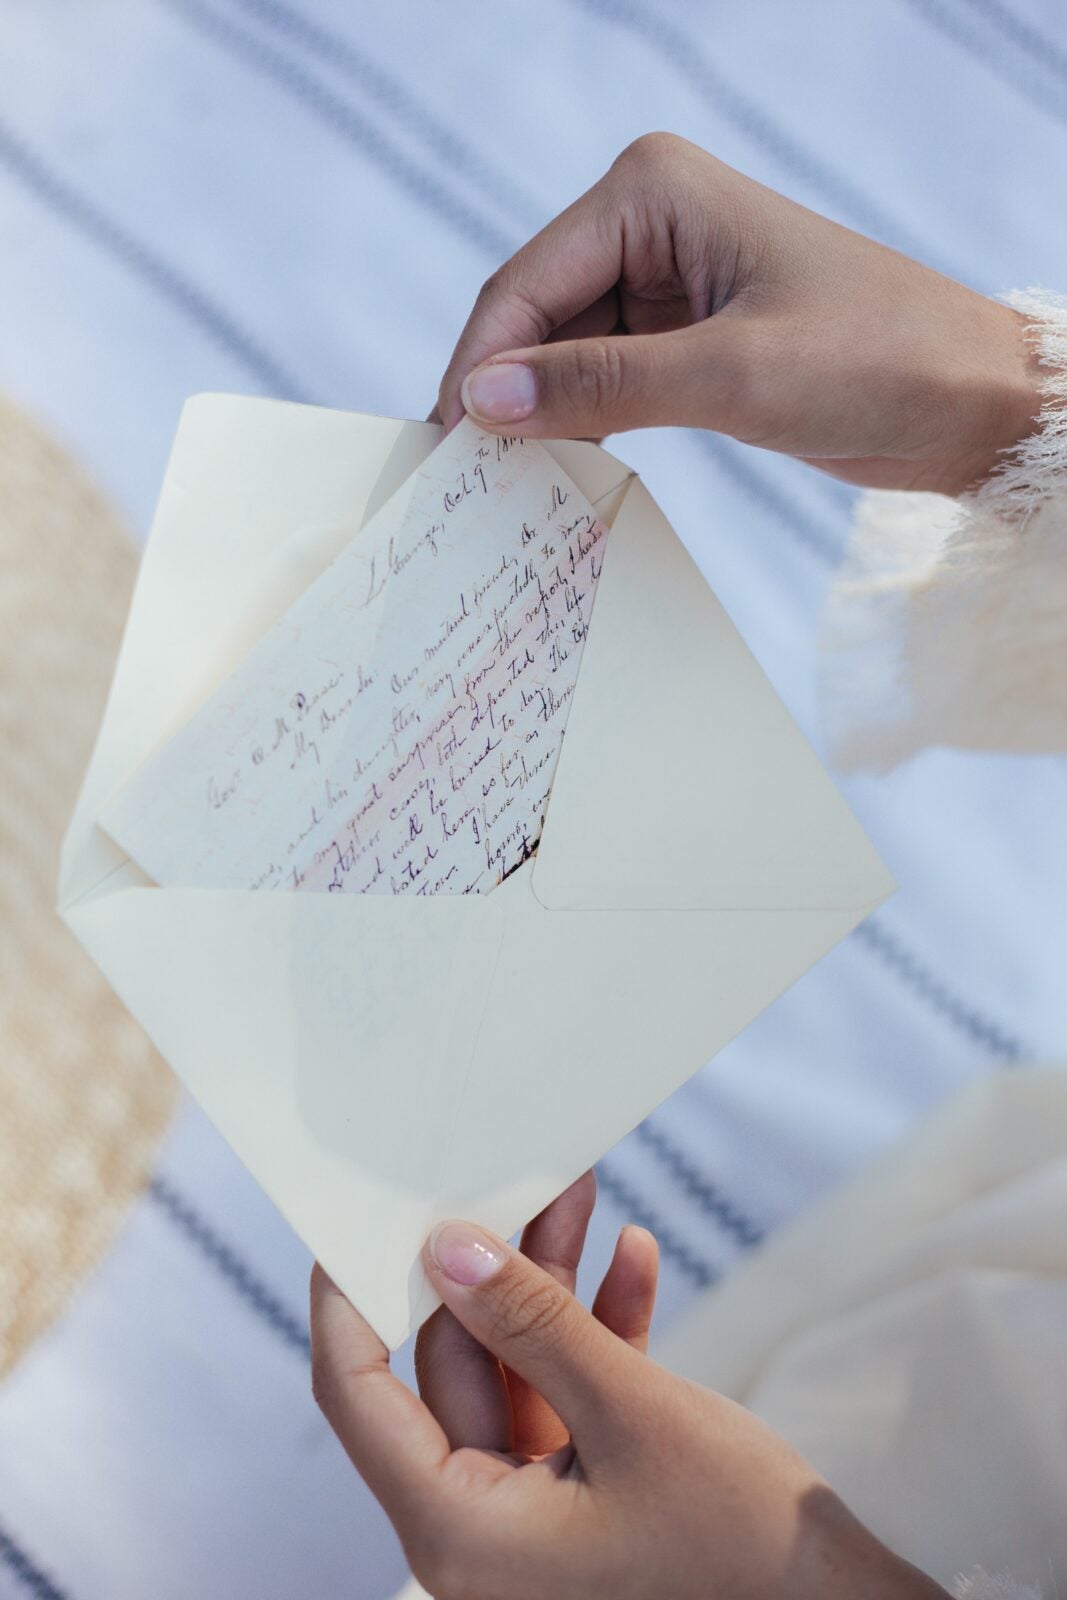 A woman's hand taking out a handwritten note from an envelope.